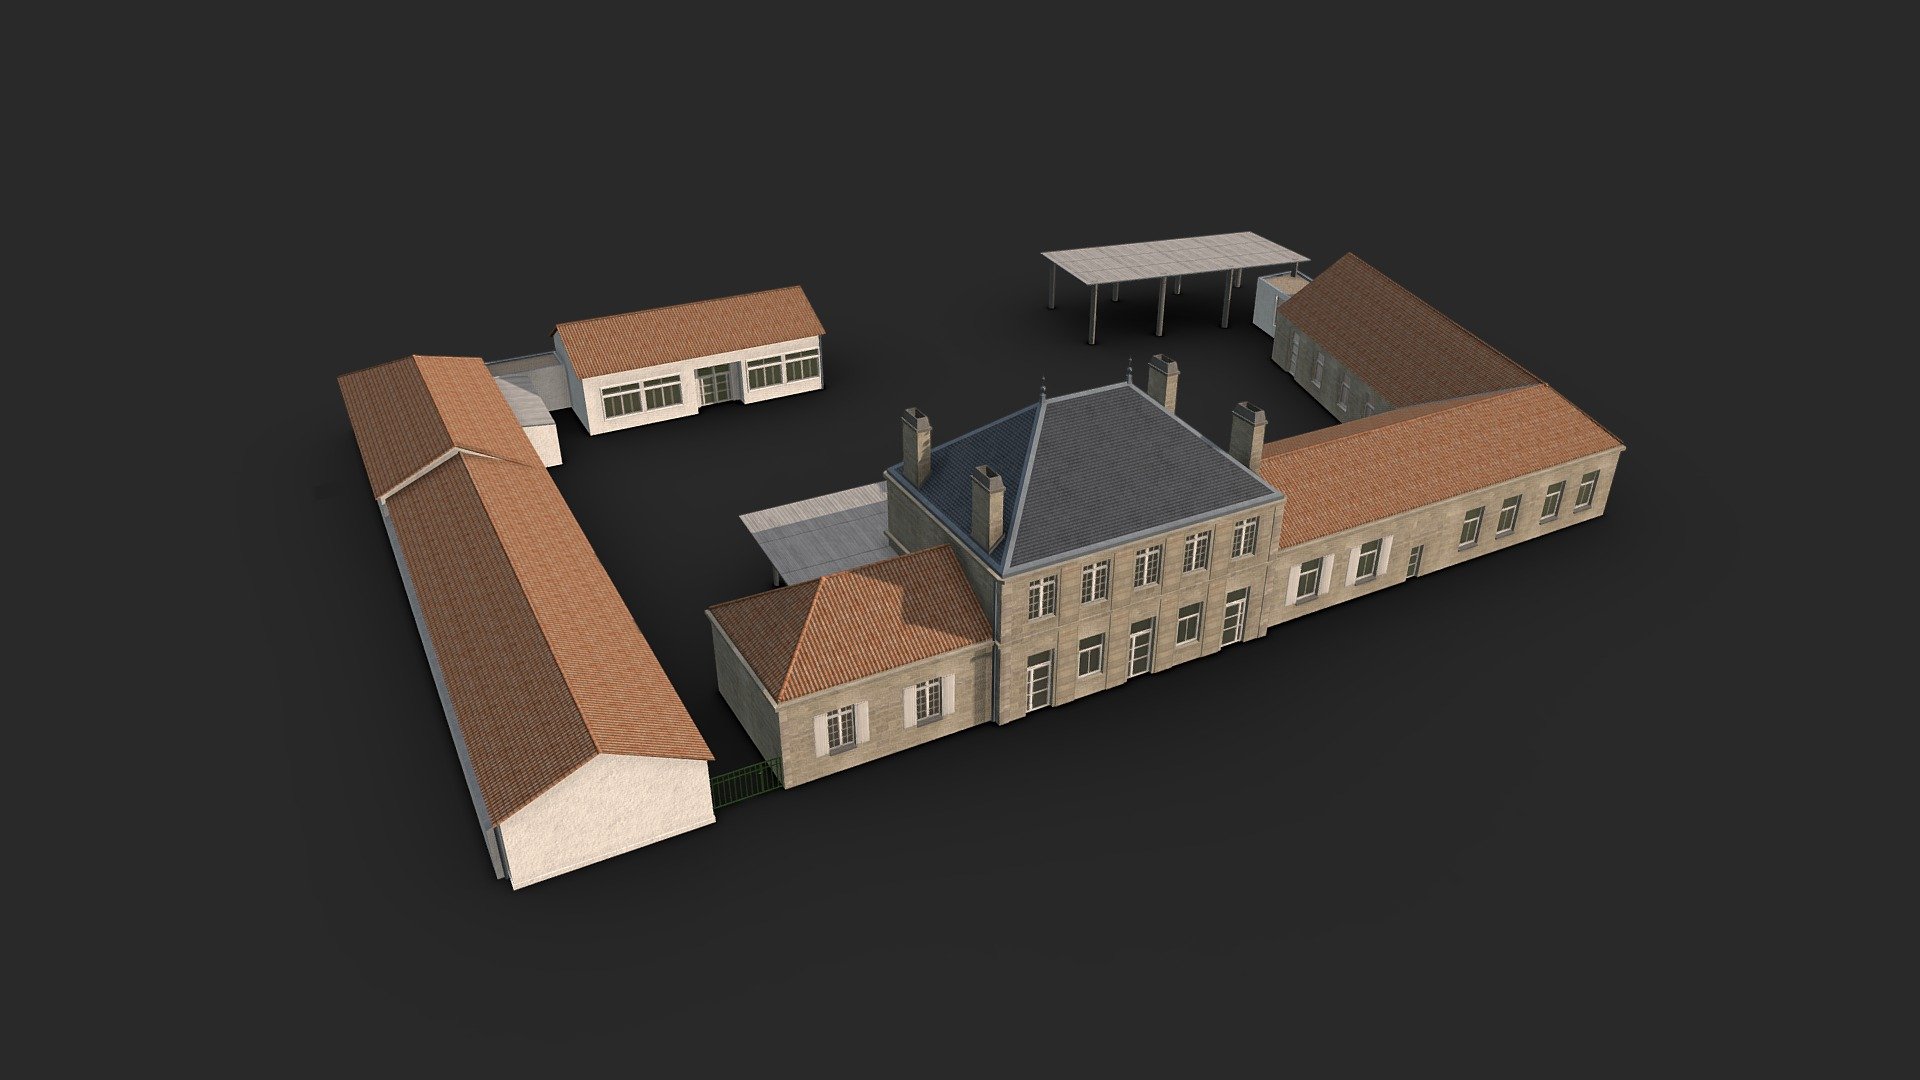 A French-inspired elementary school designed in lowpoly for the game Cities: Skylines 3d model